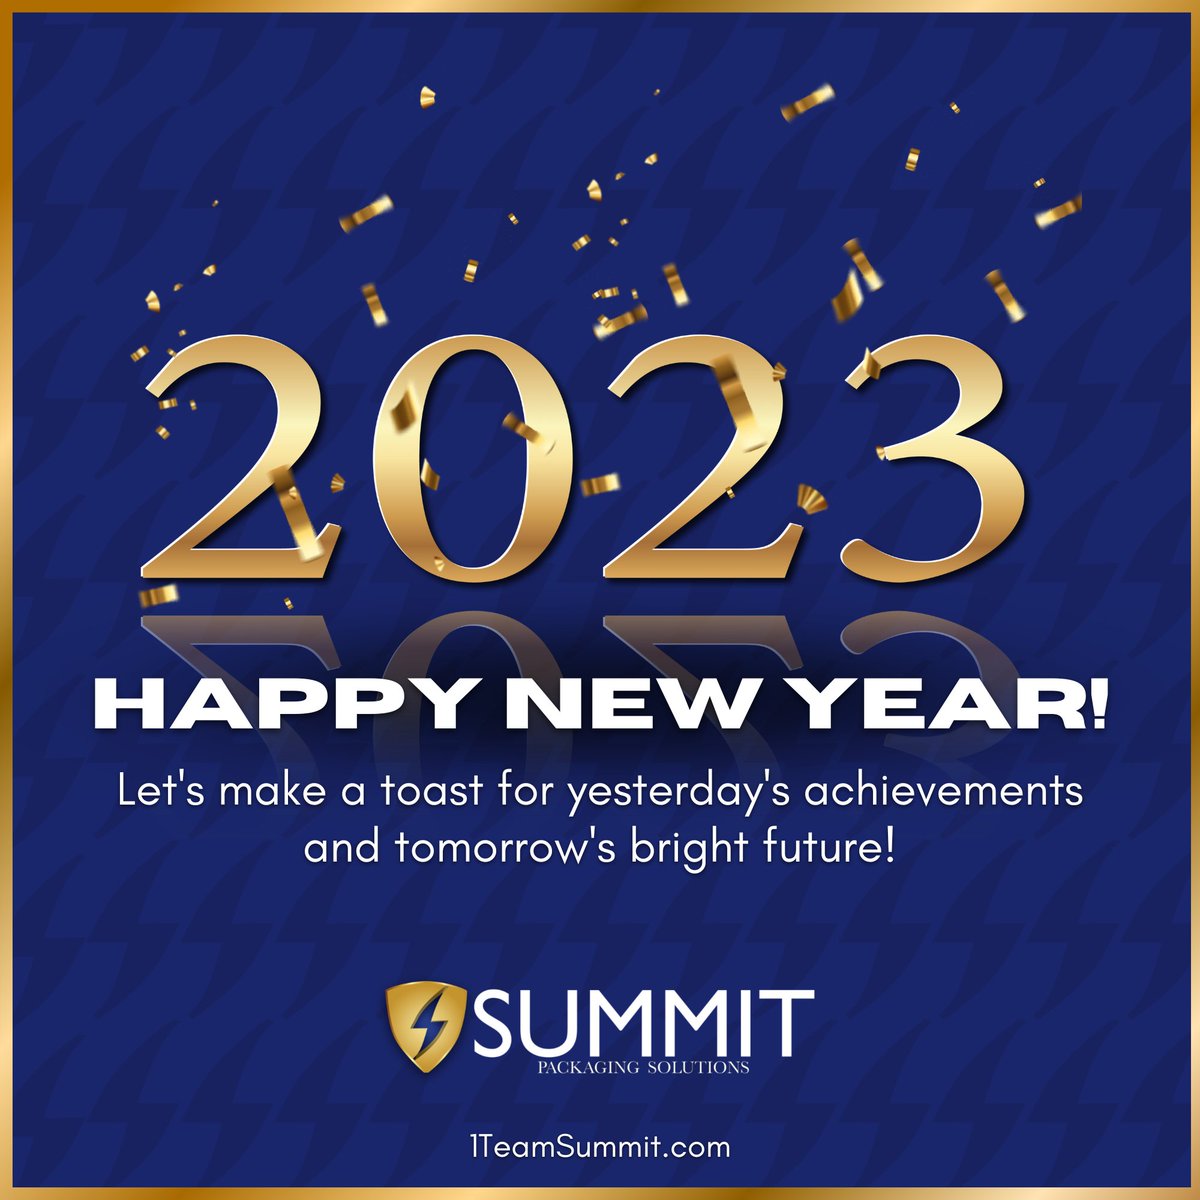 Happy New Year from Summit Packaging Solutions!